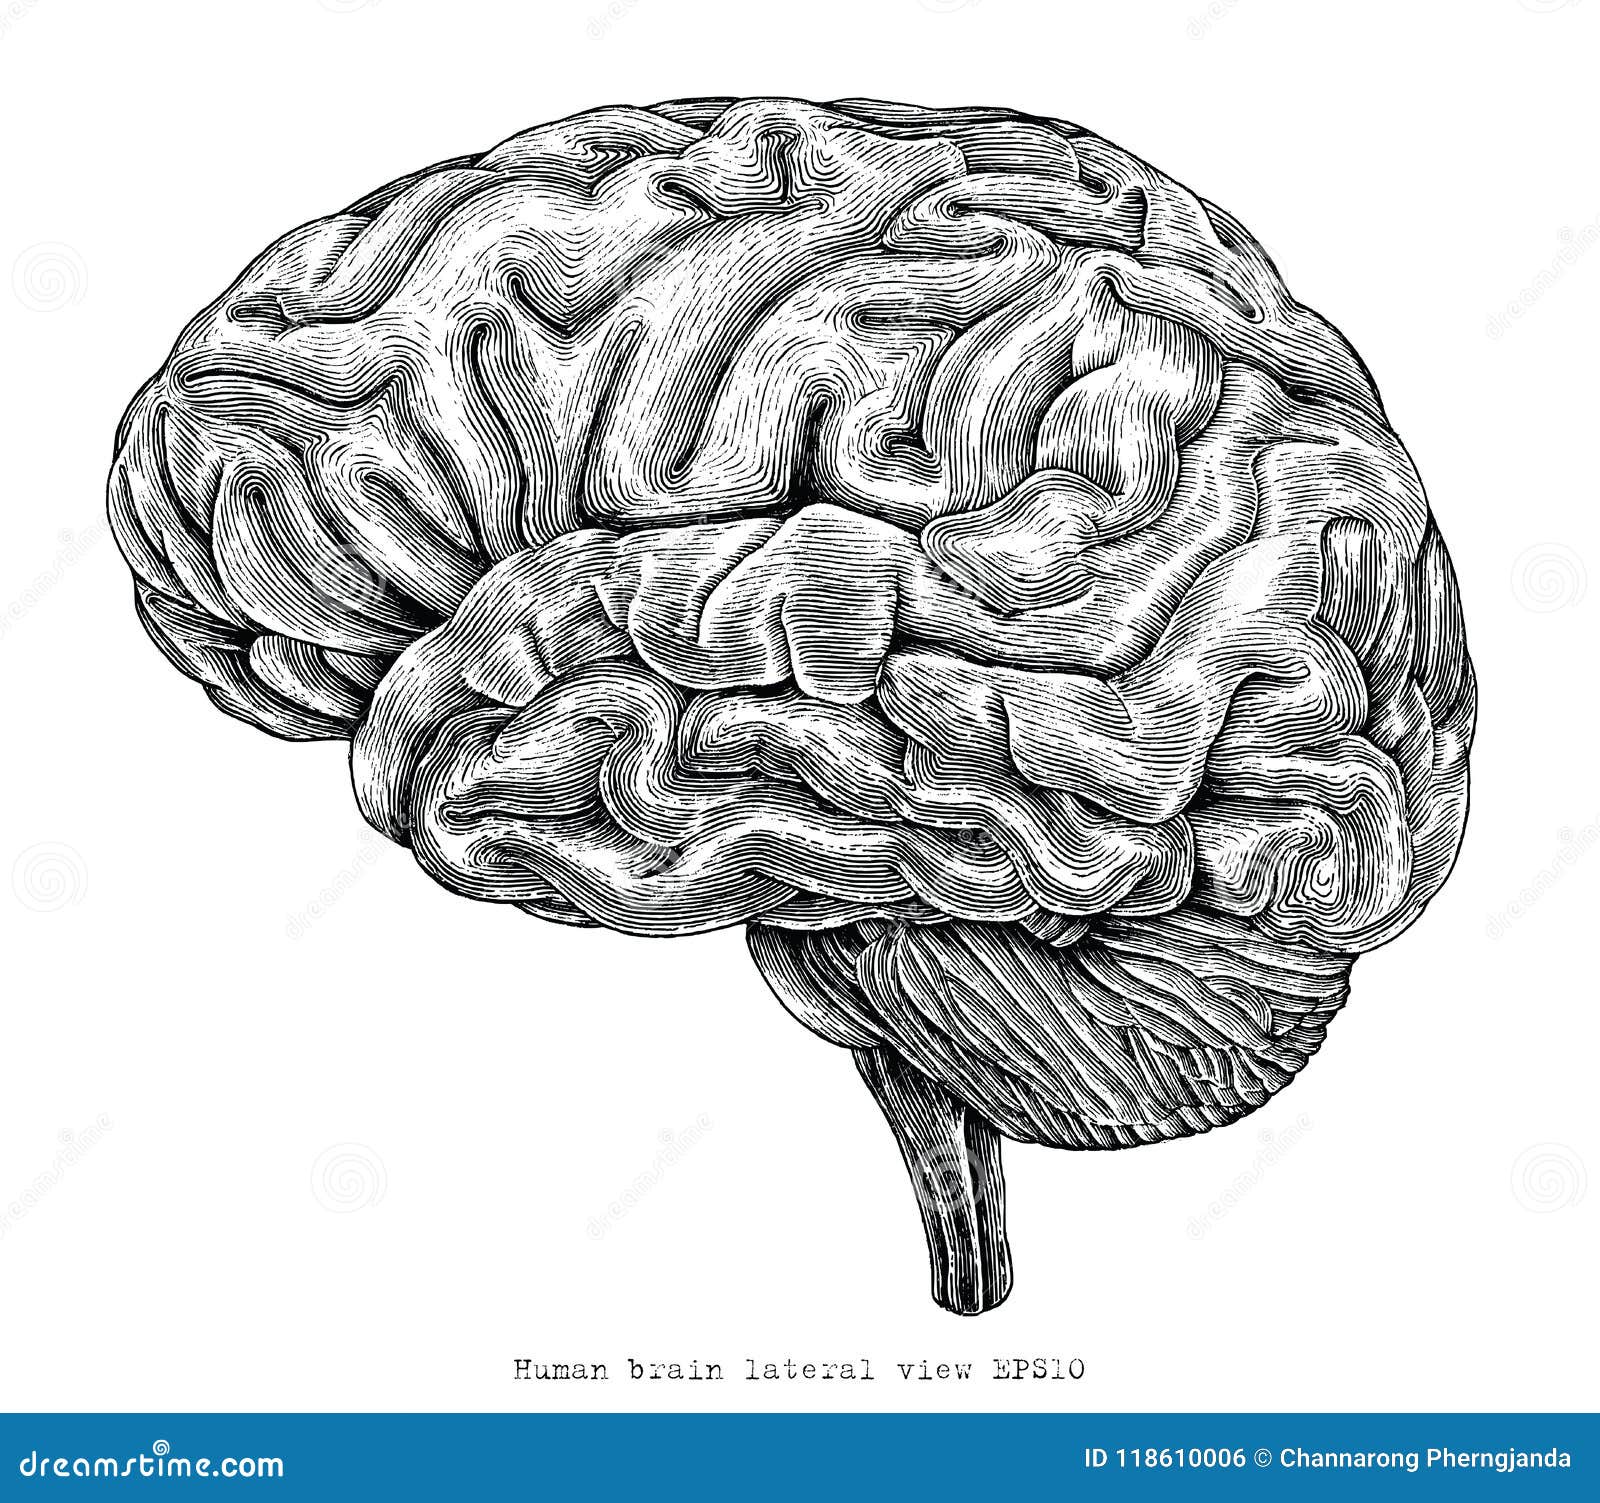 human brain lateral view hand drawing vintage engraving 